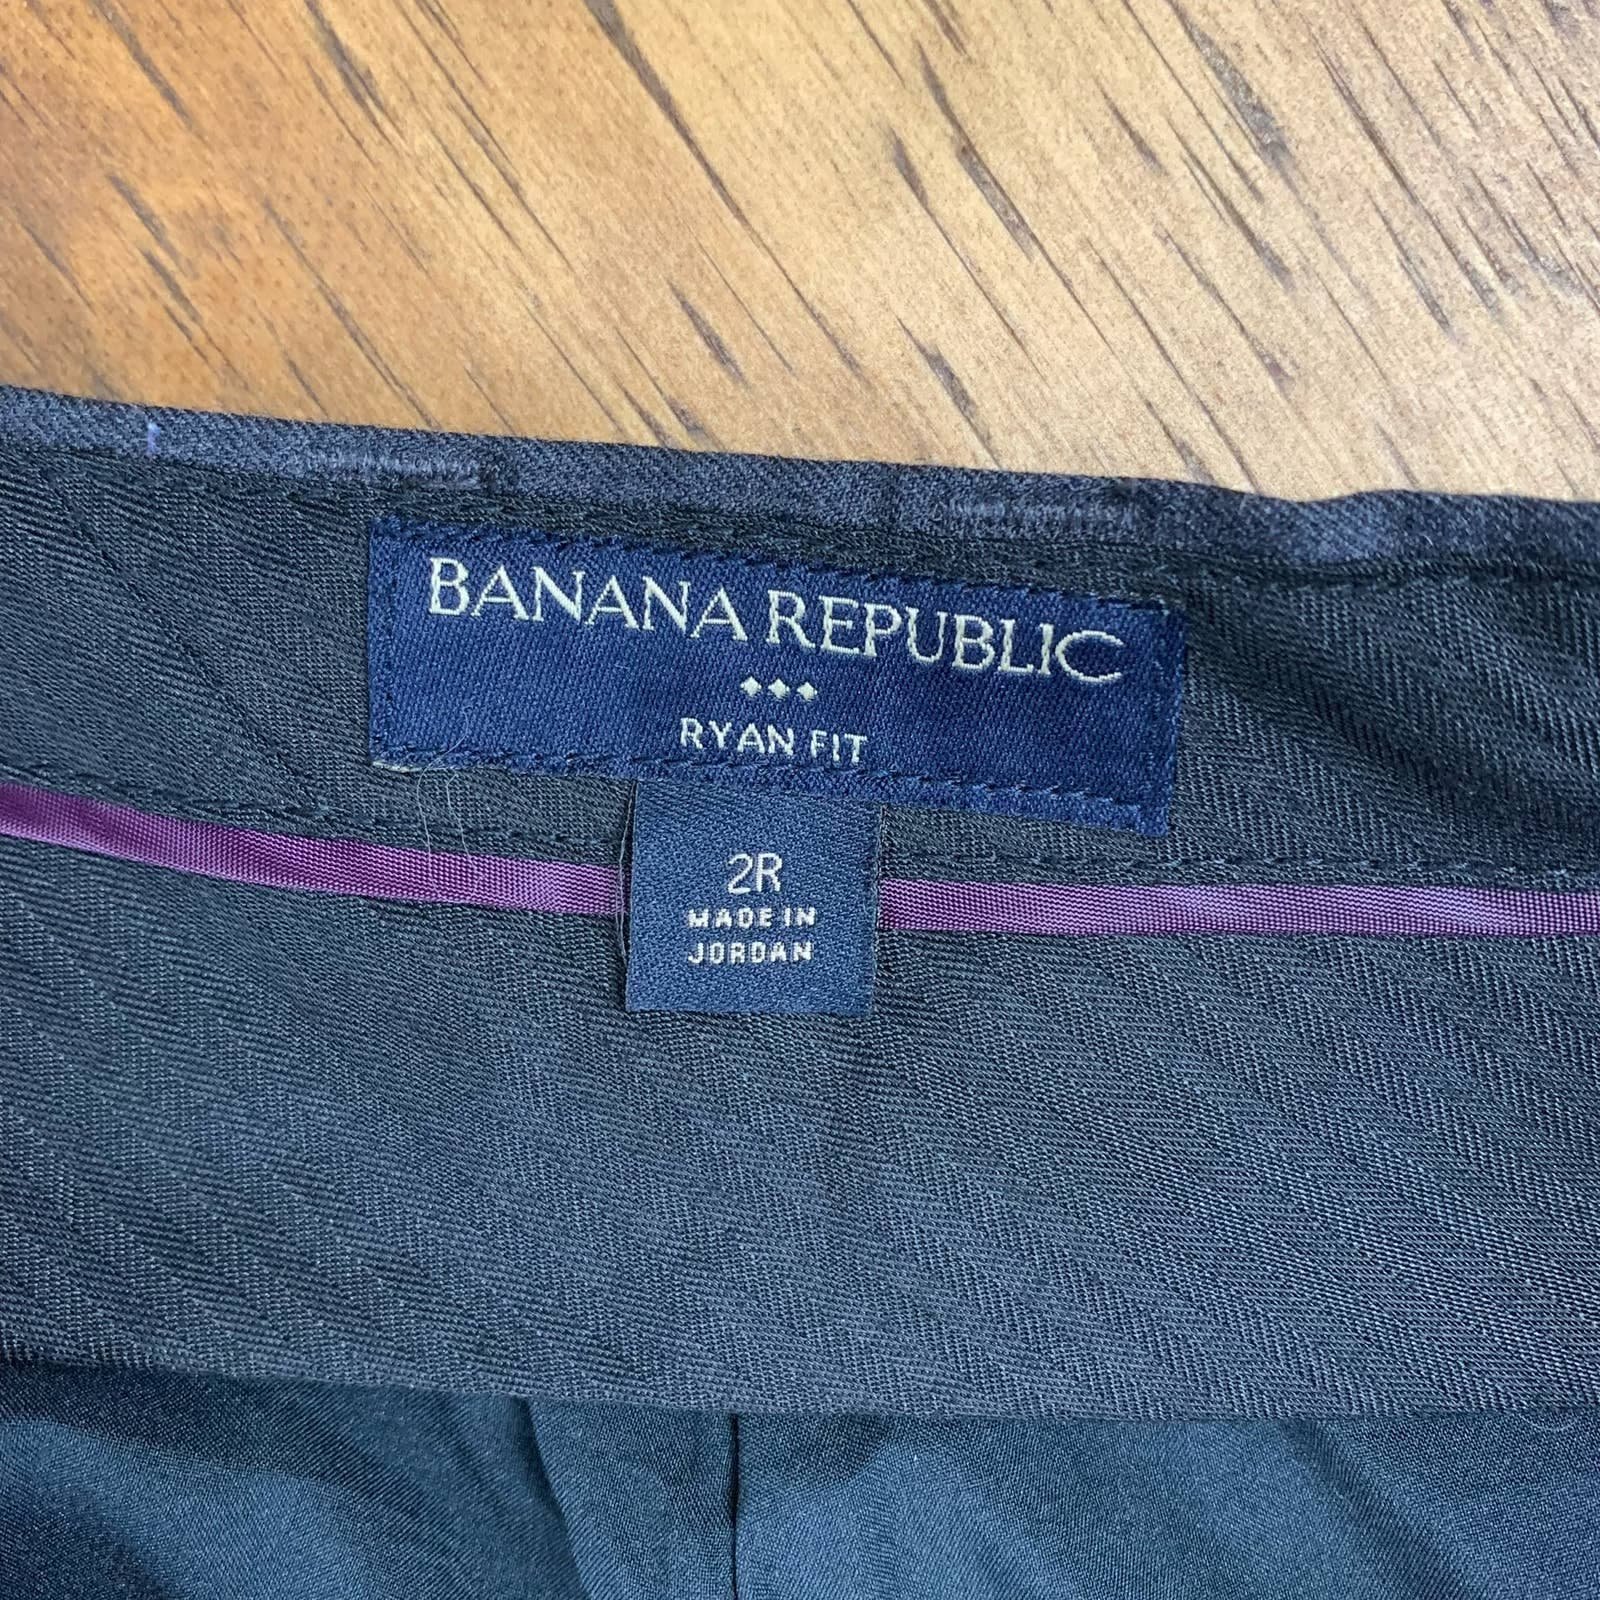 Cheap Banana Republic Womens Pants Charcoal Gray Ryan Fit Straight Leg Wool Blend 2R IPBfxGTUW Everyday Low Prices